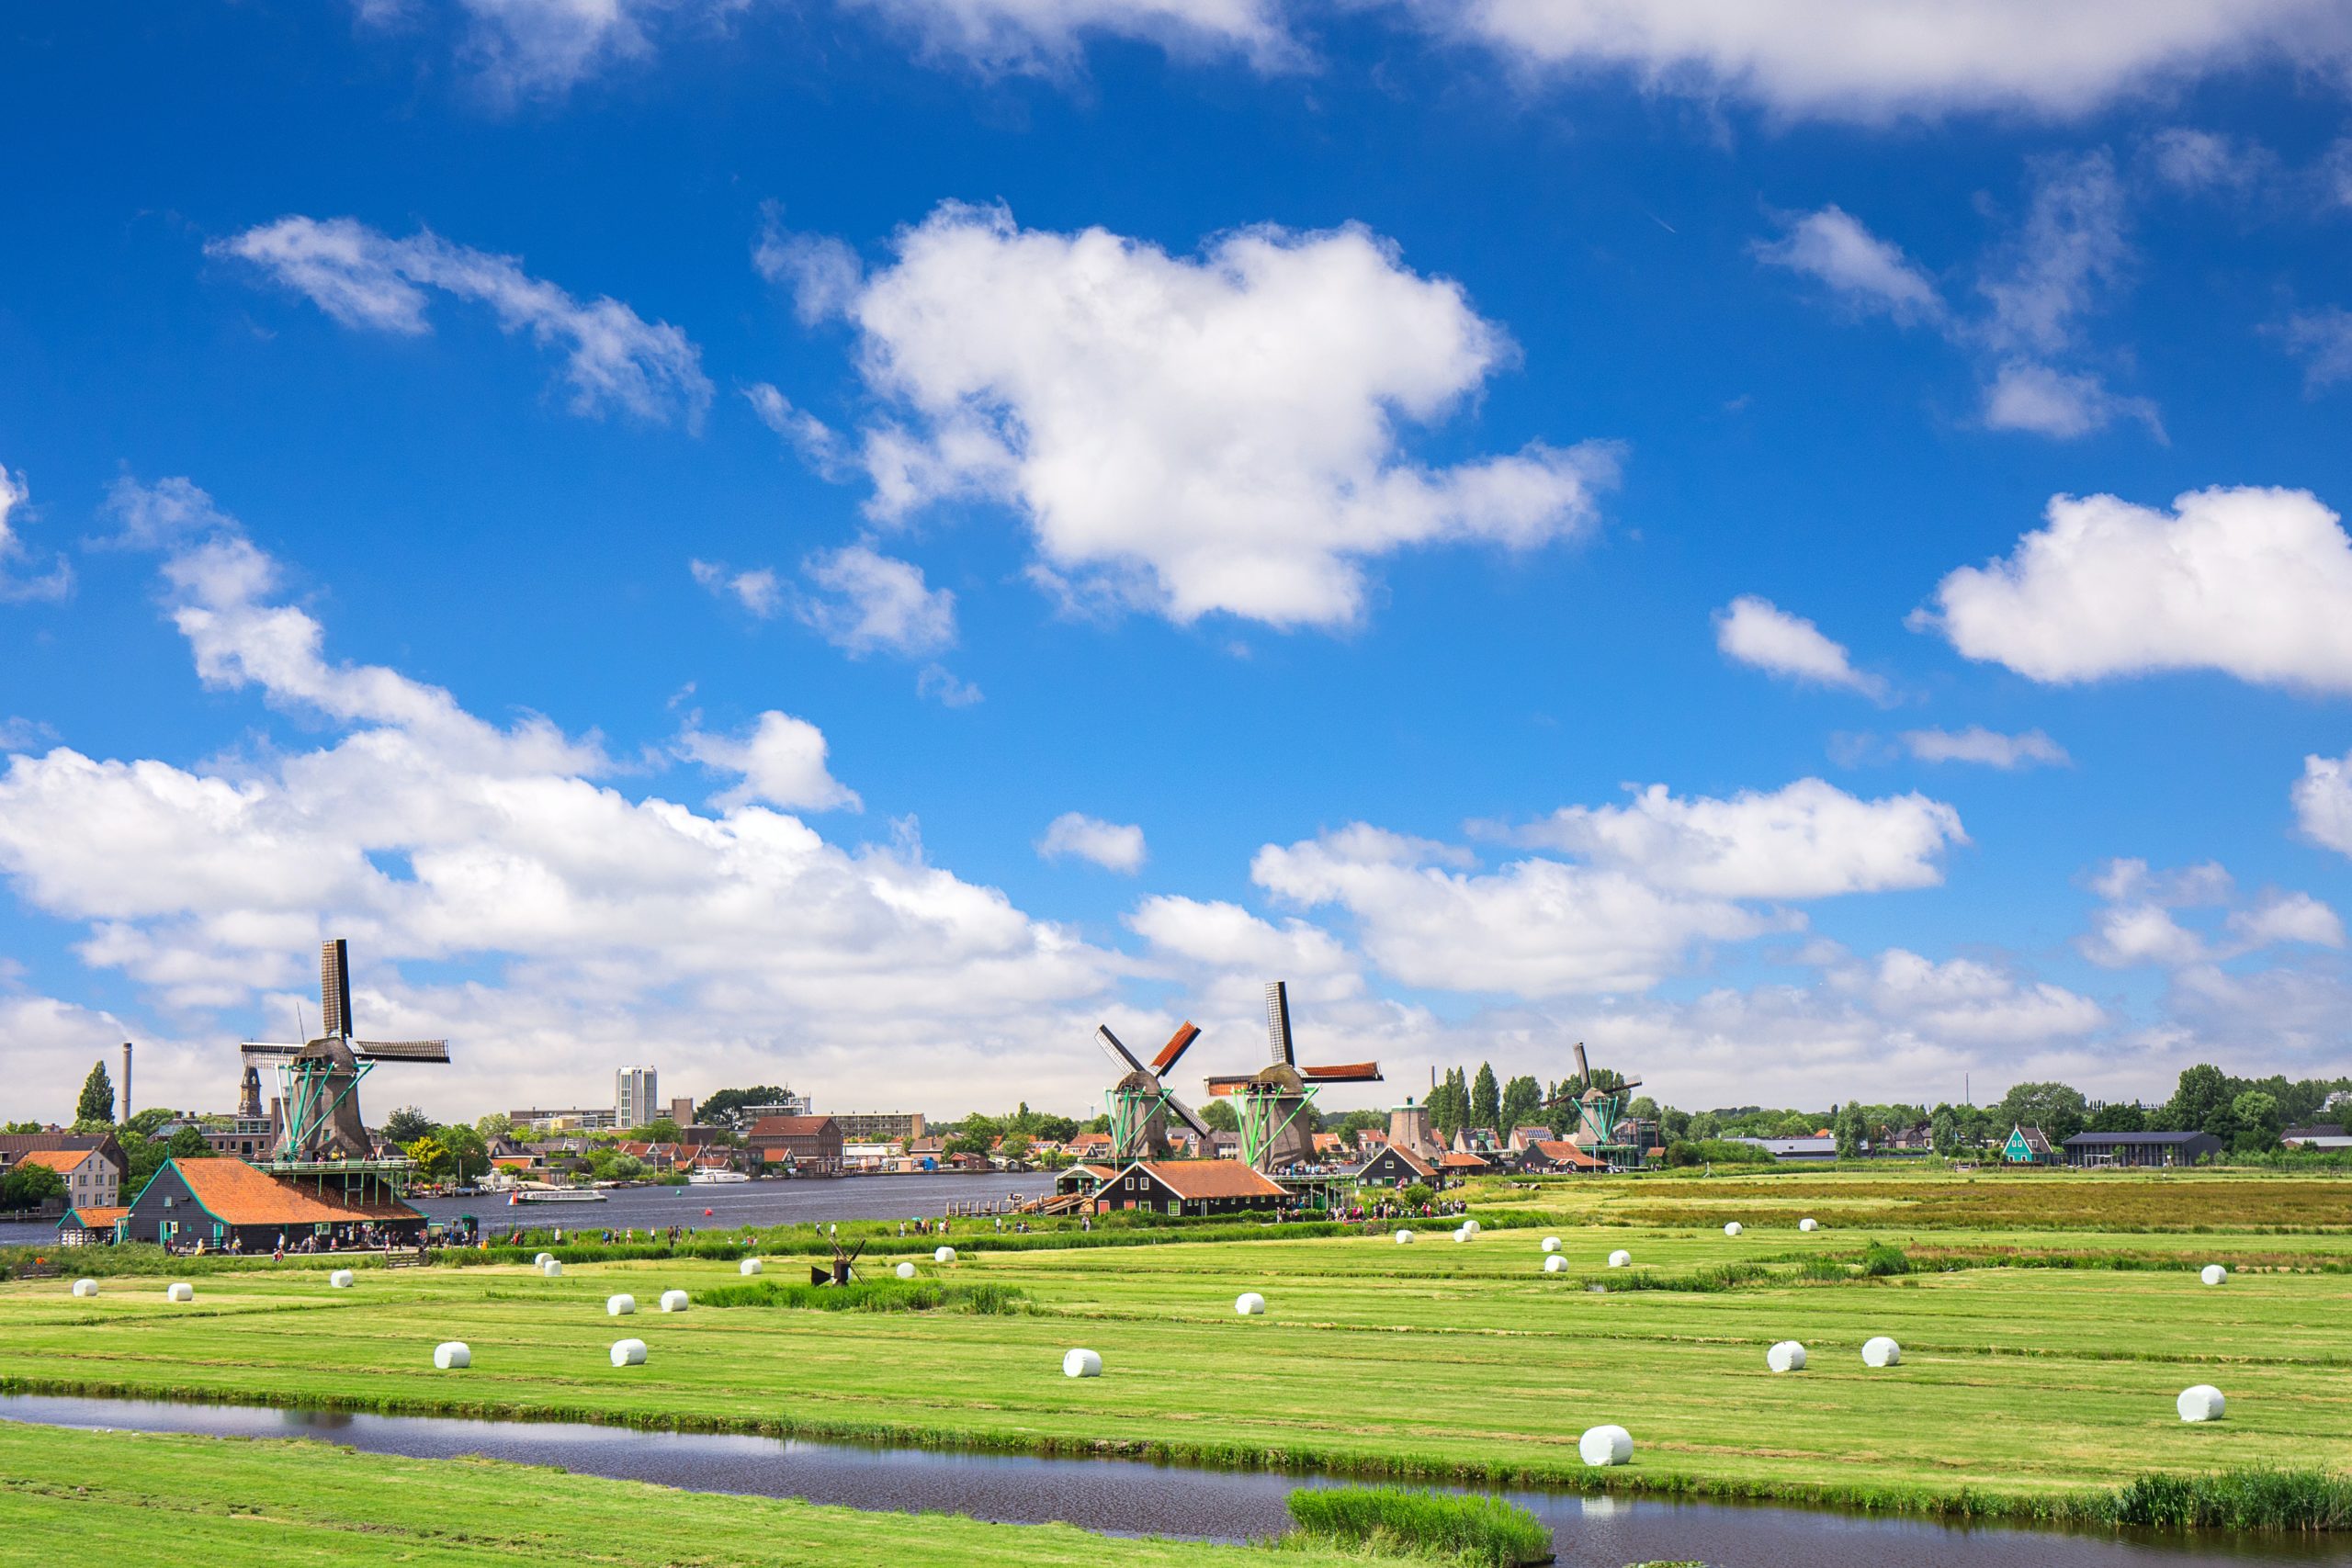 Depiction of an Amsterdam countryside, windmills spinning in the background against a blue sky